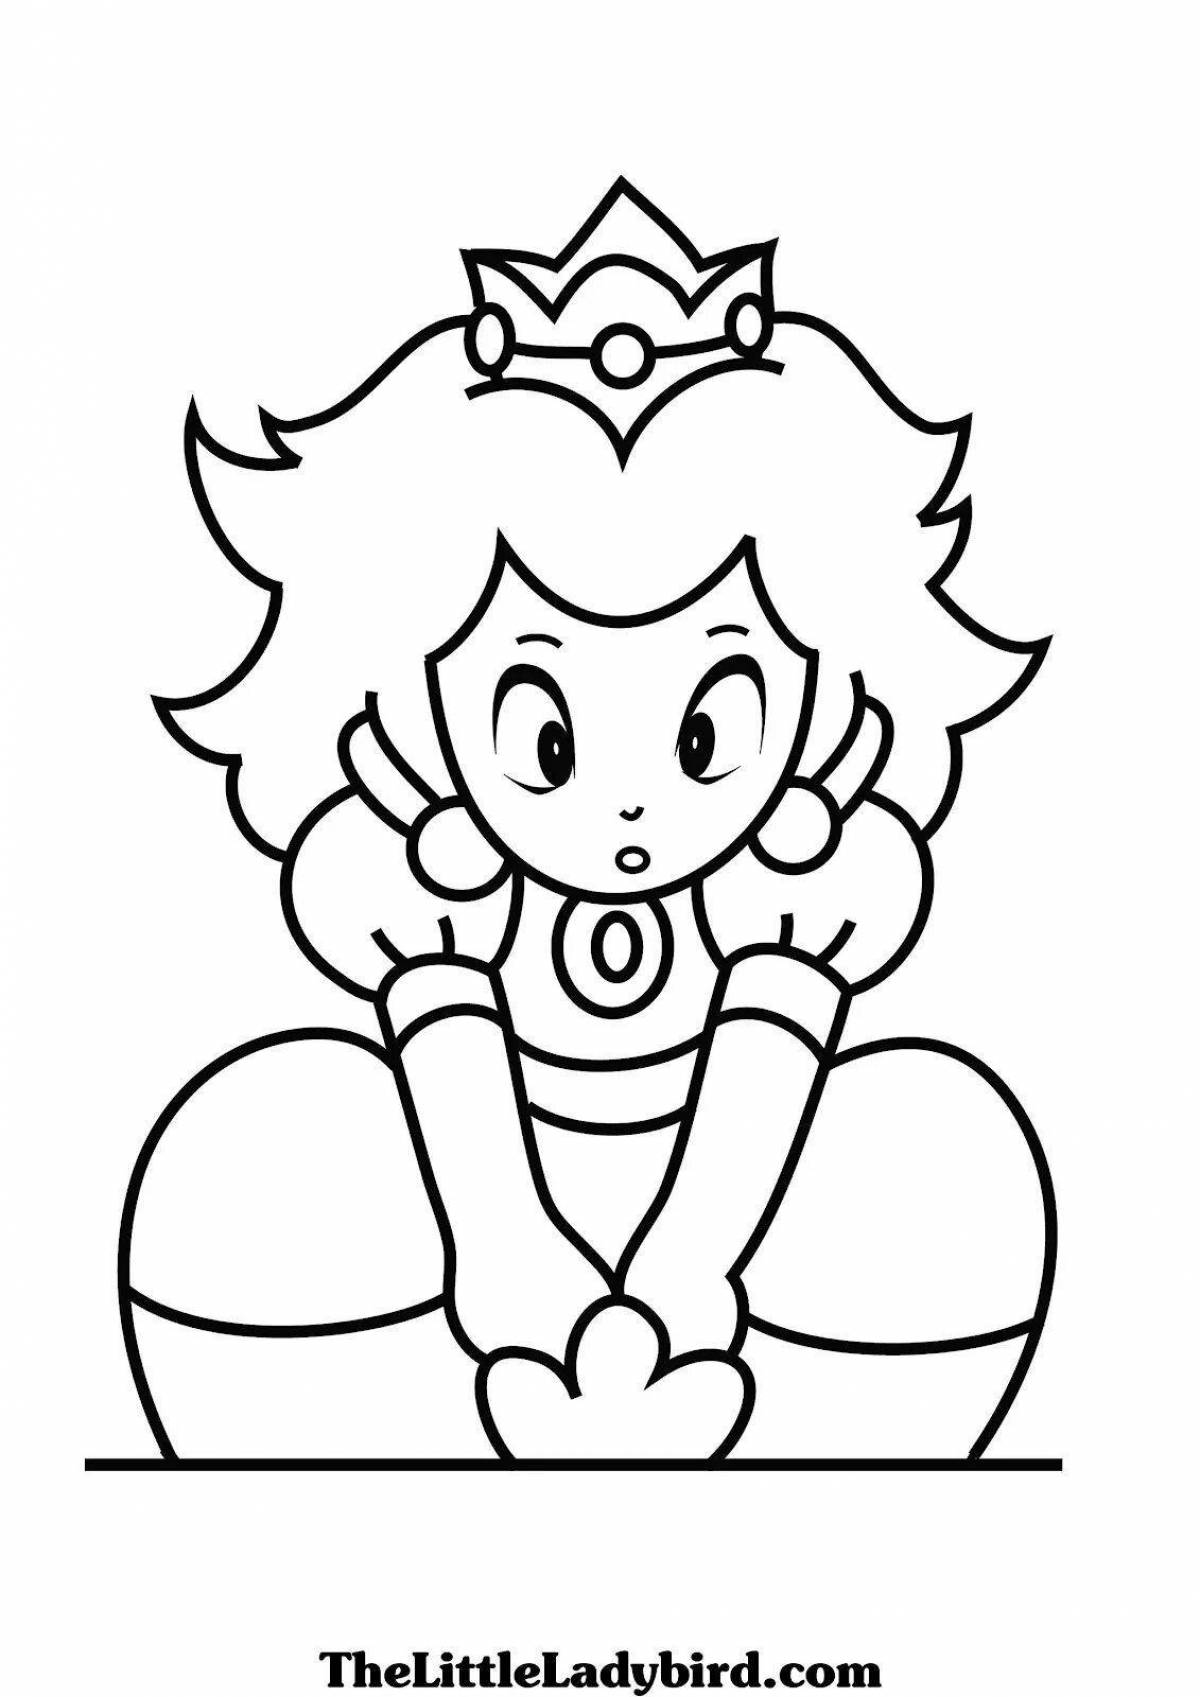 Great peach coloring book